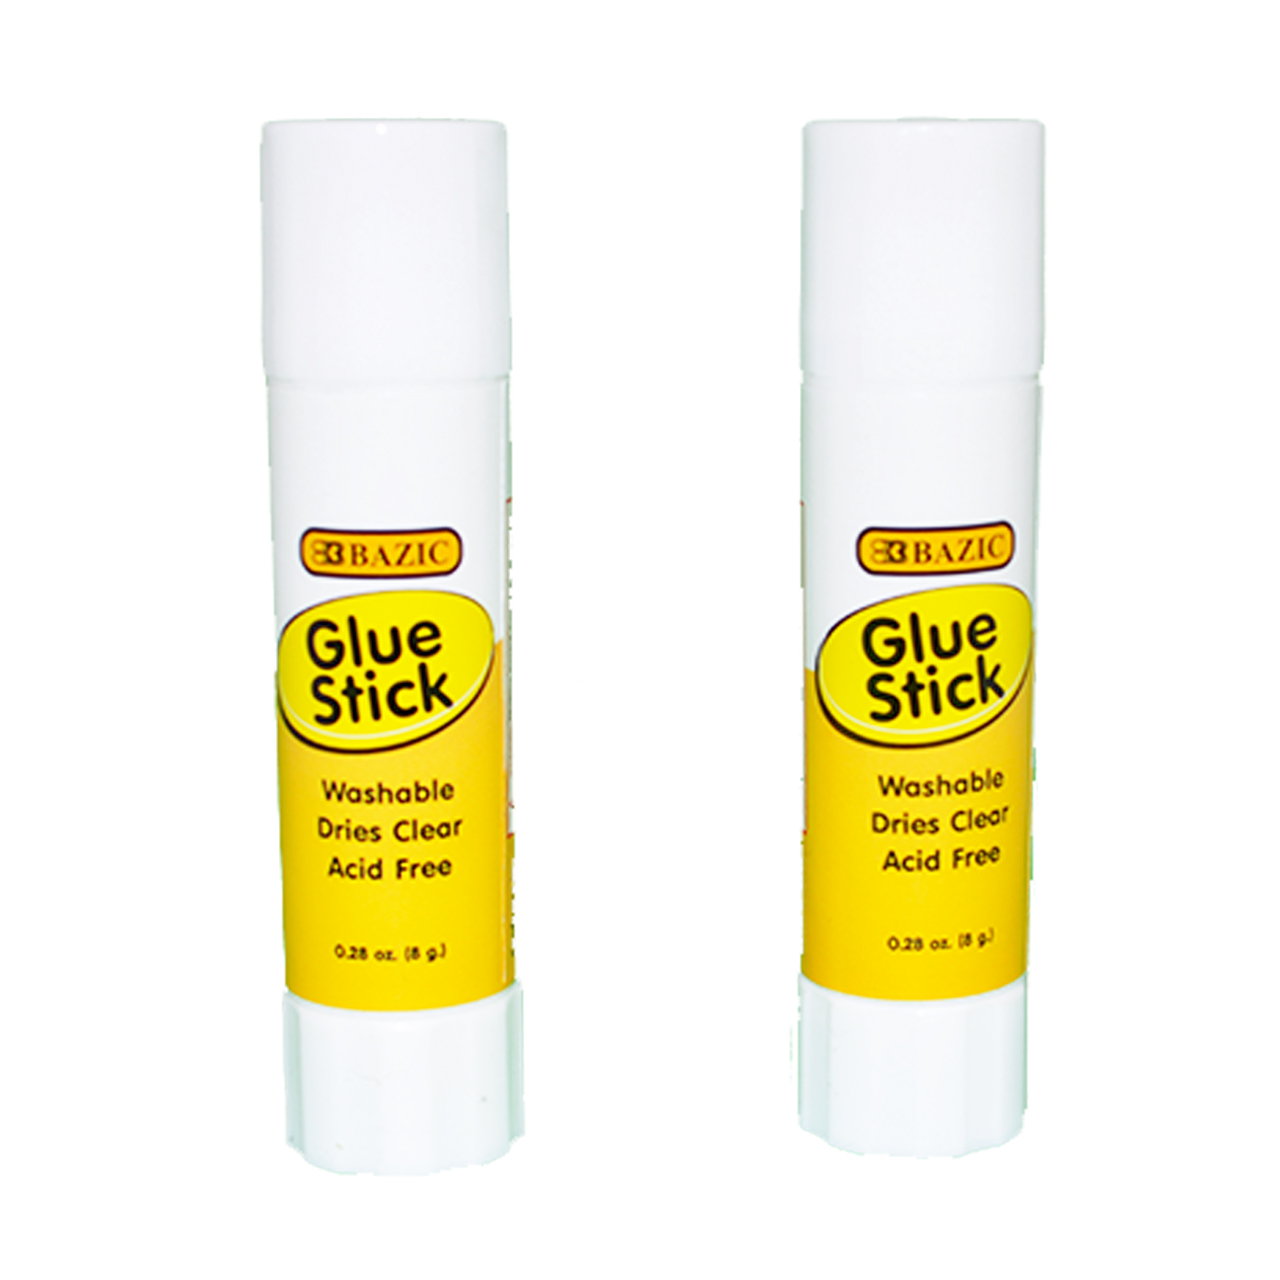 Glue Stick Review – From Victory Road